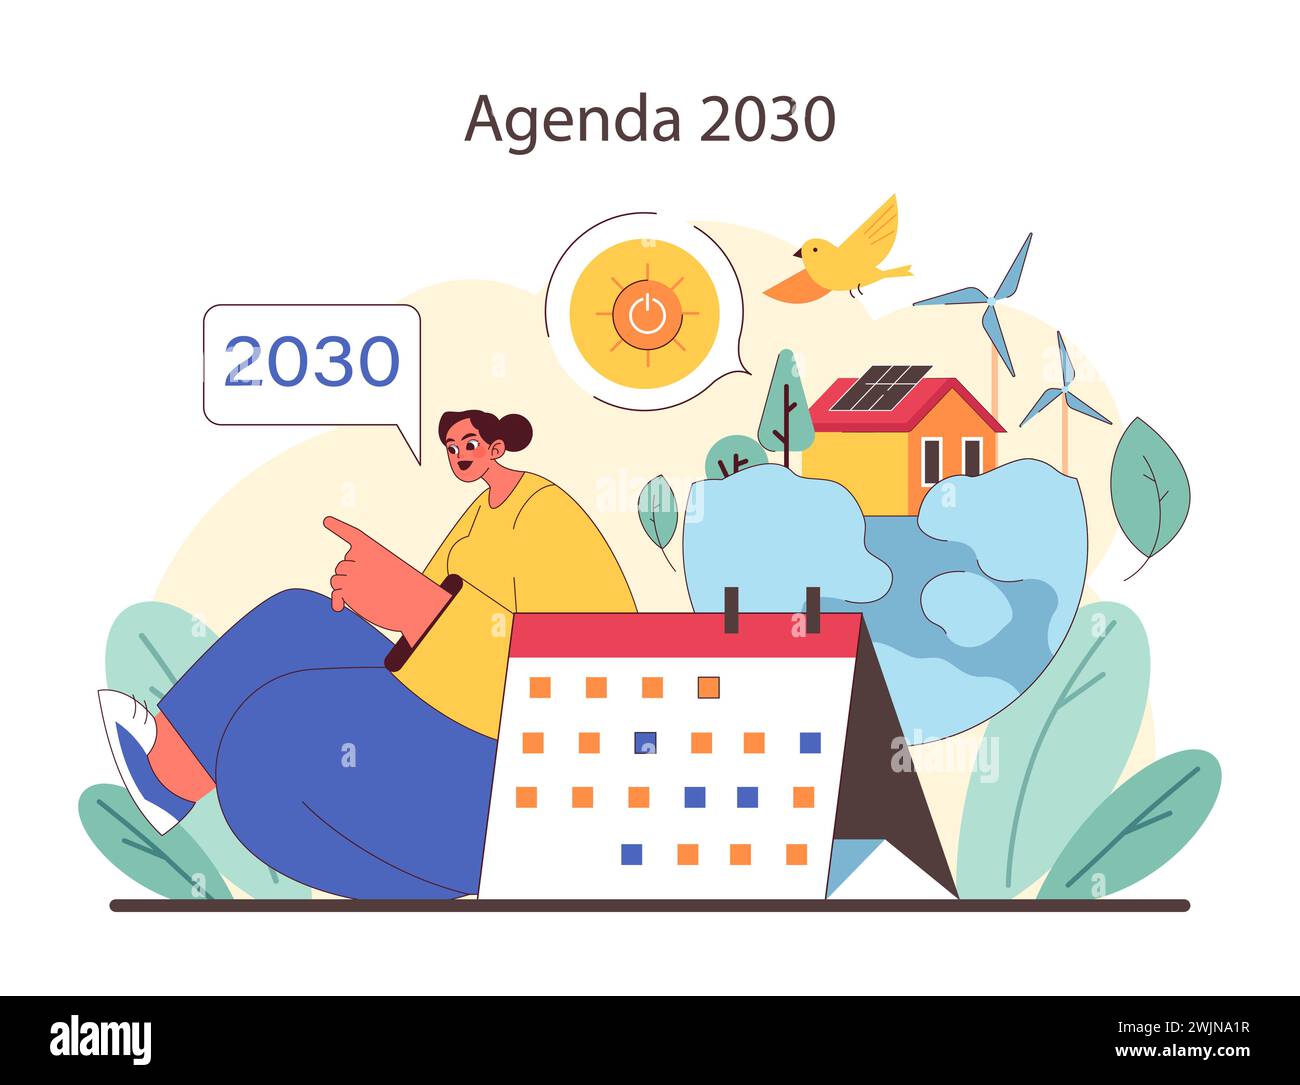 Futuristic vision for 2030. Advocating renewable energy and sustainable cities. Embracing natural solutions for a greener tomorrow. Inspiring eco-friendly urban life. Flat vector illustration. Stock Vector